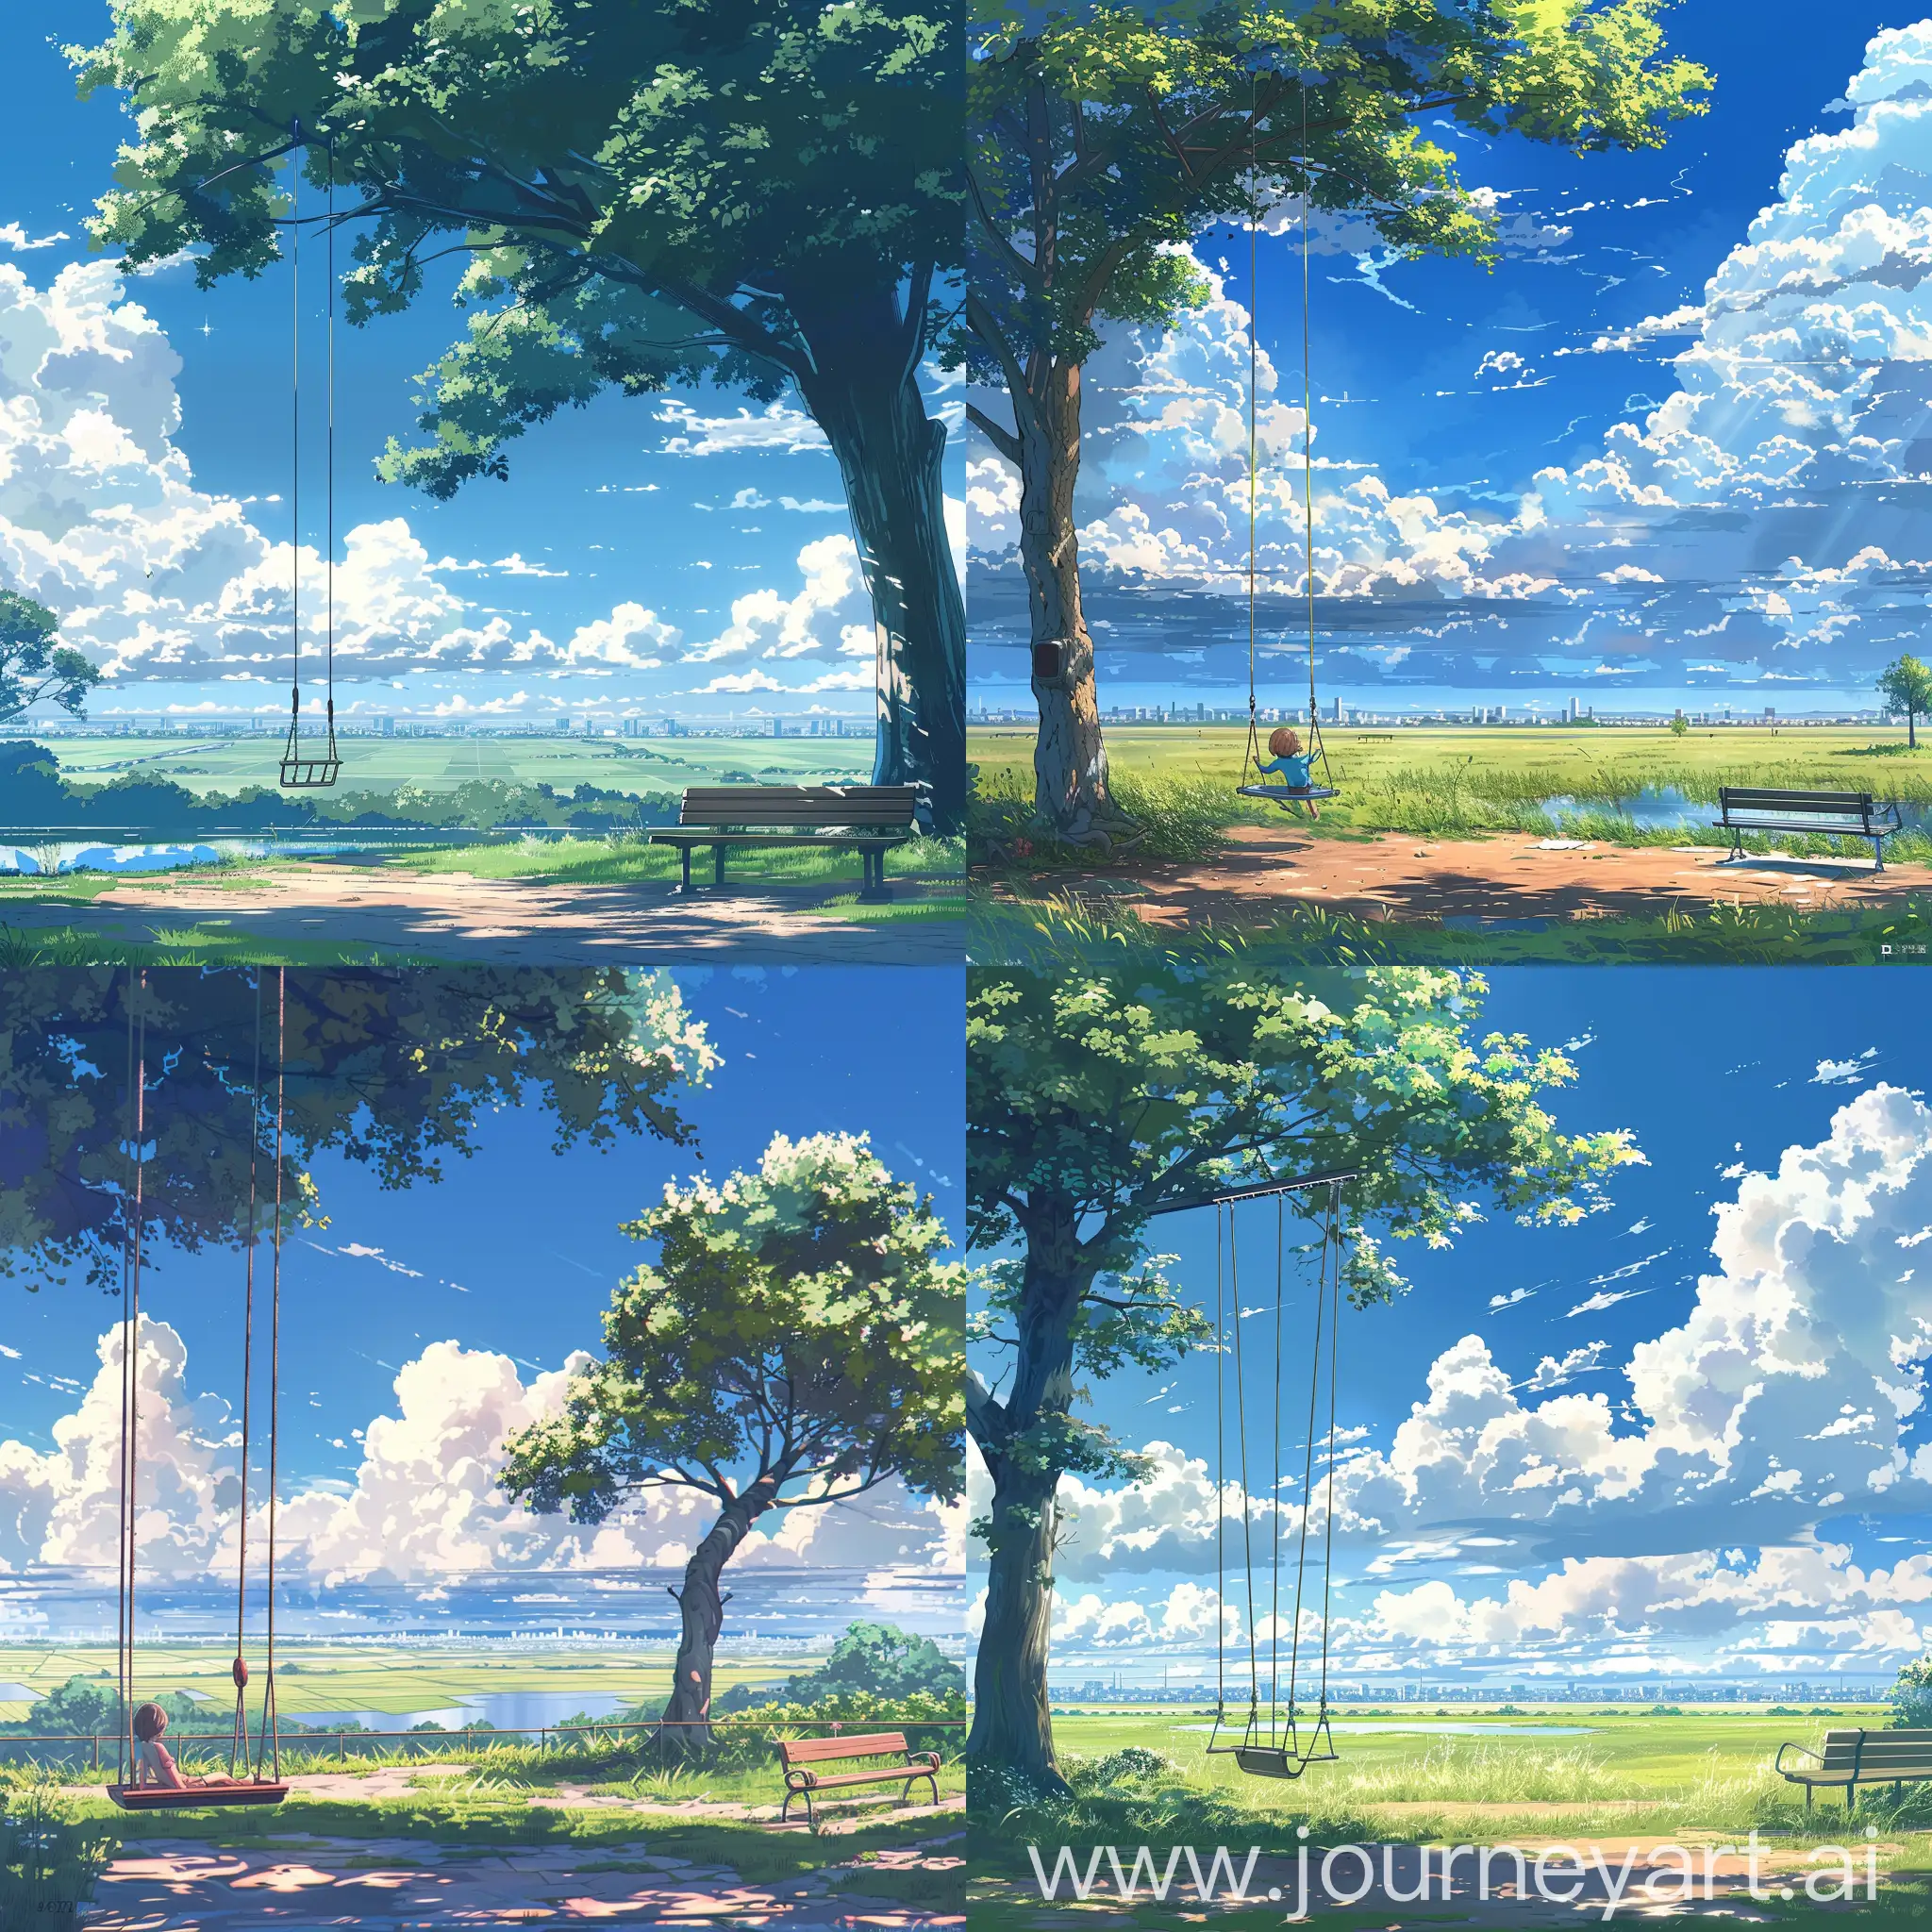 Anime style,aesthetic,best quality anime style touching,a nostalgia and some peace vibes ,viewing a vast plain park with one kids swing afternoon time in the beautiful summers,beautiful blue sky,long fluffy clouds,a tree,far a city can be seen,small water line by side,park bench.